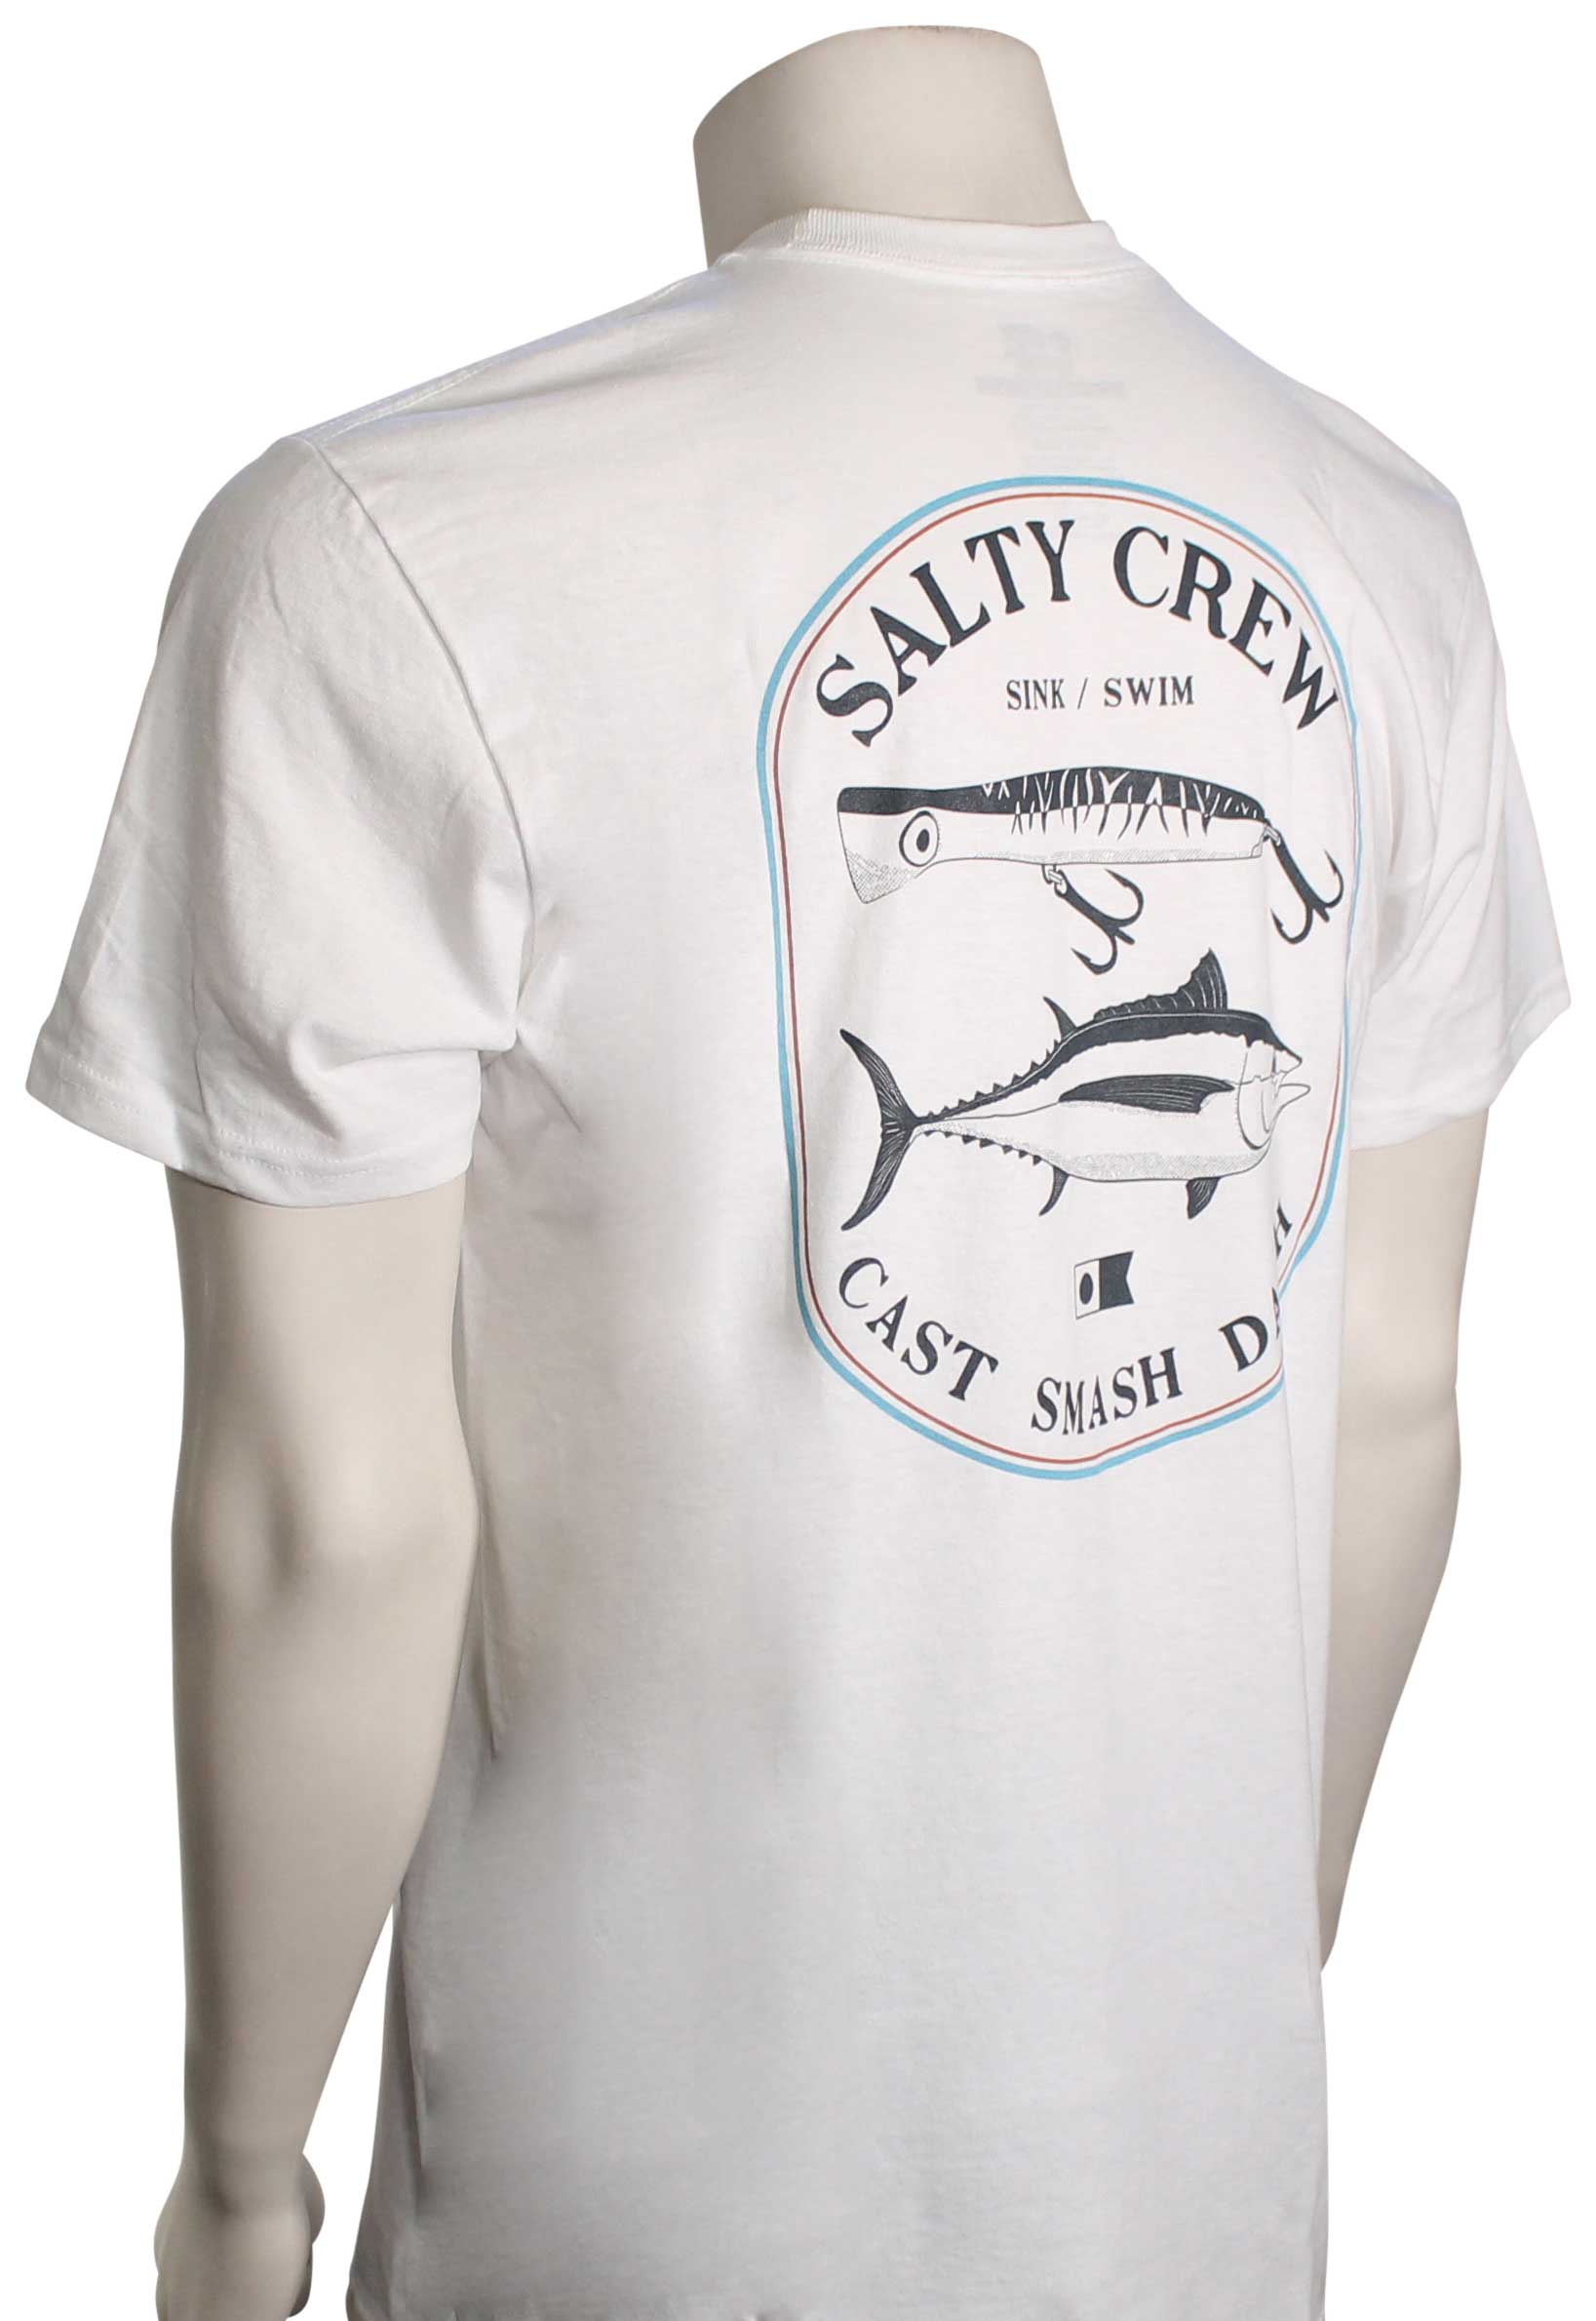 Salty Crew Surface Standard SS Tee White L